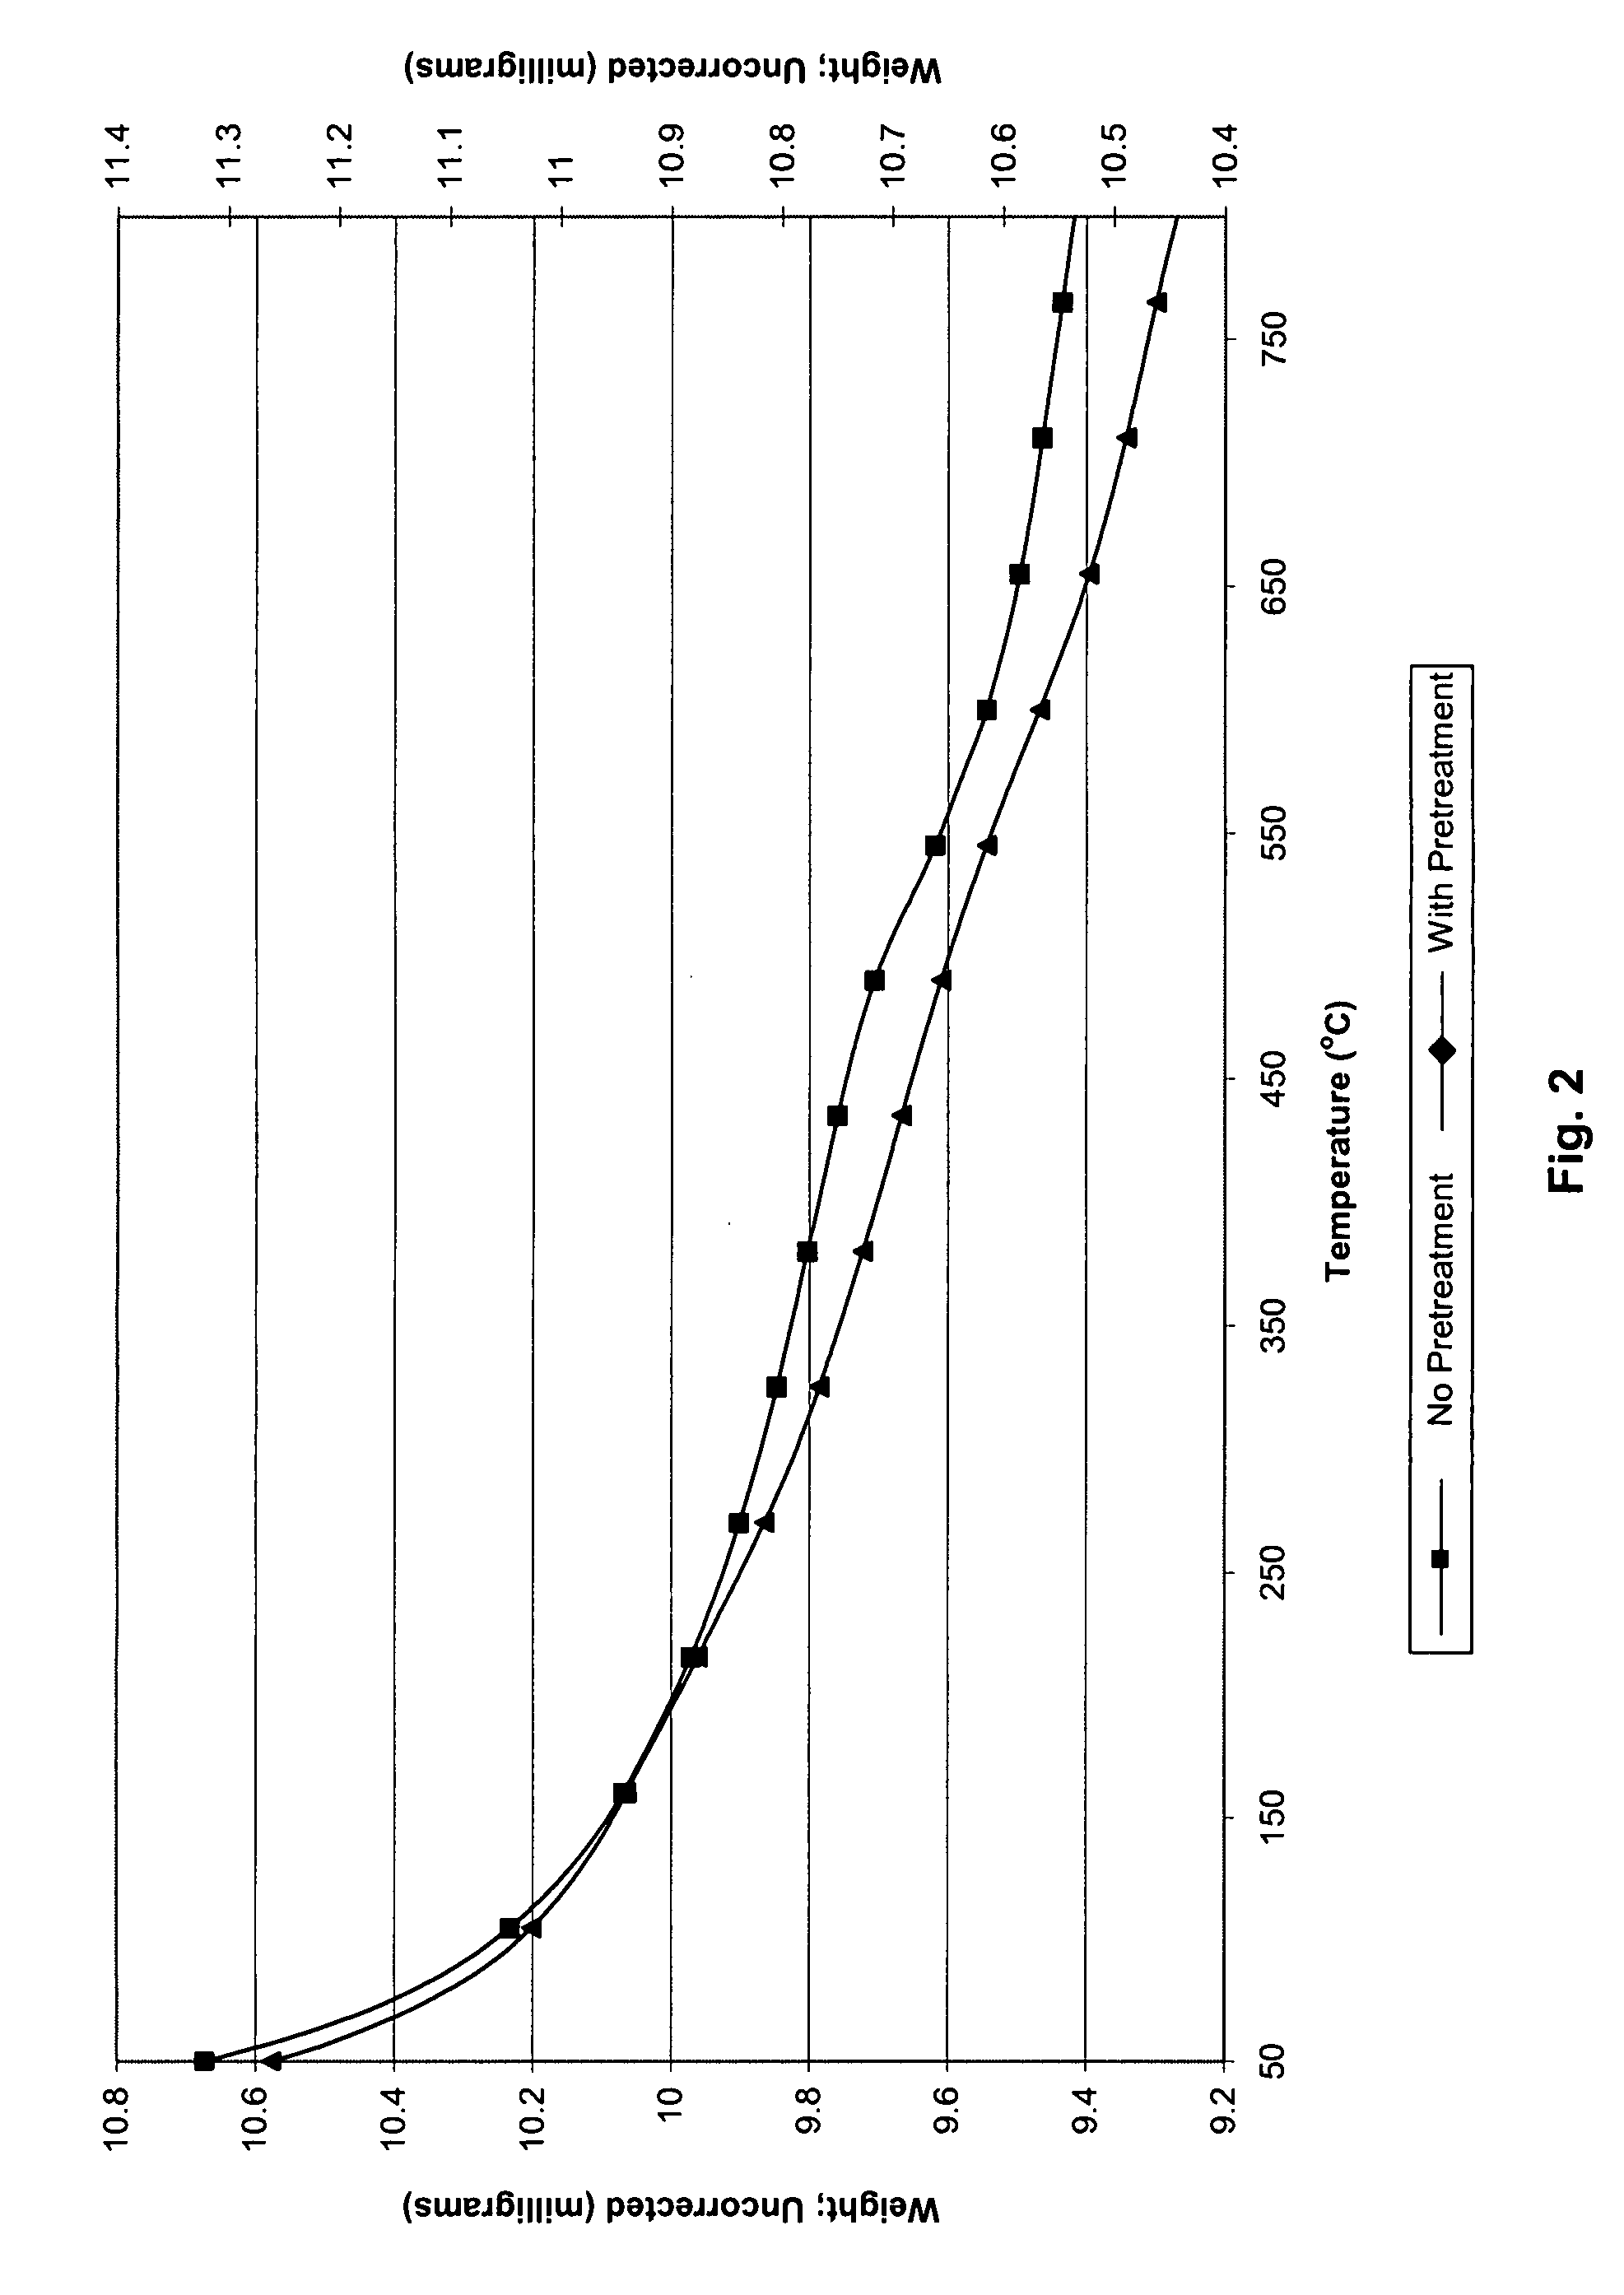 Process for reduction of inorganic contaminants from waste streams